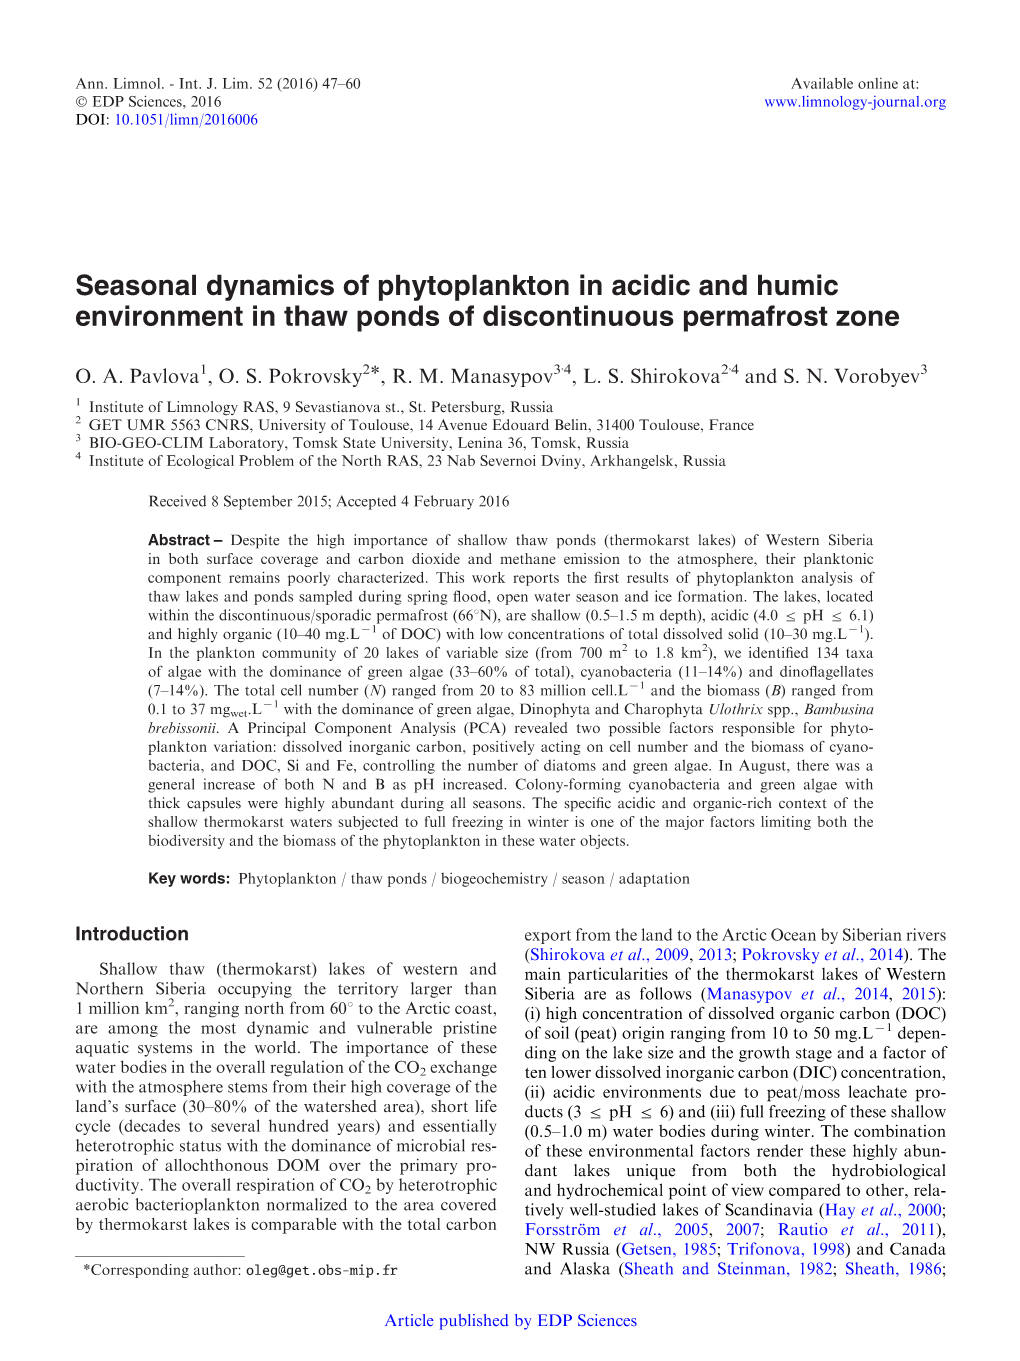 Seasonal Dynamics of Phytoplankton in Acidic and Humic Environment in Thaw Ponds of Discontinuous Permafrost Zone